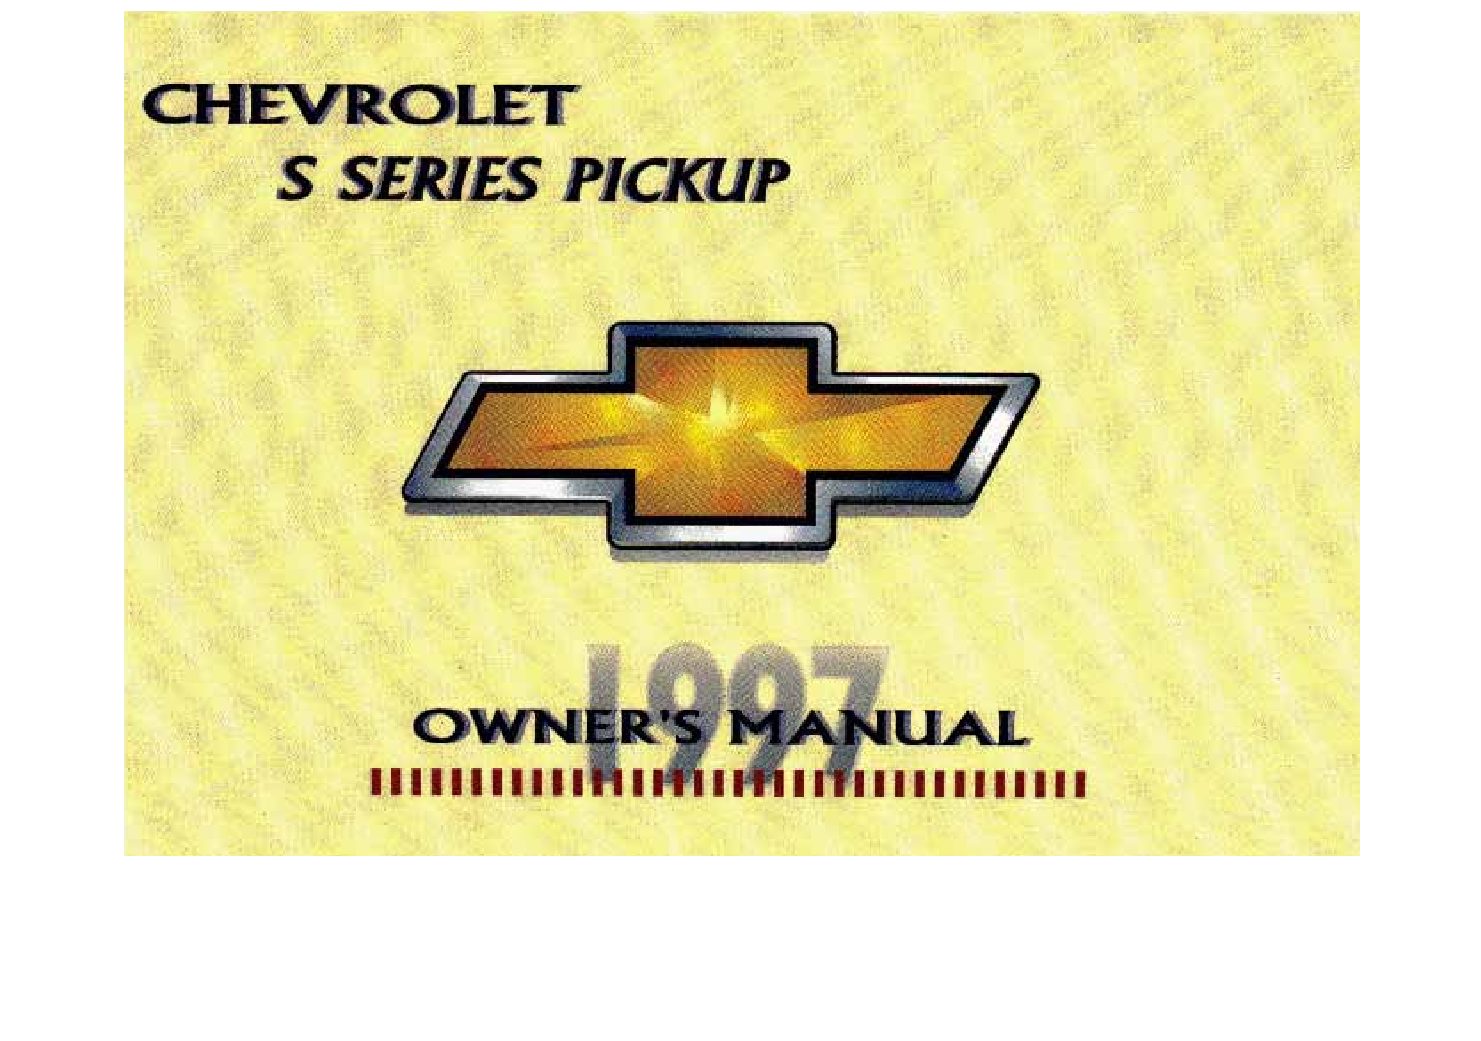 1997 Chevrolet S10 Owner’s Manual Image